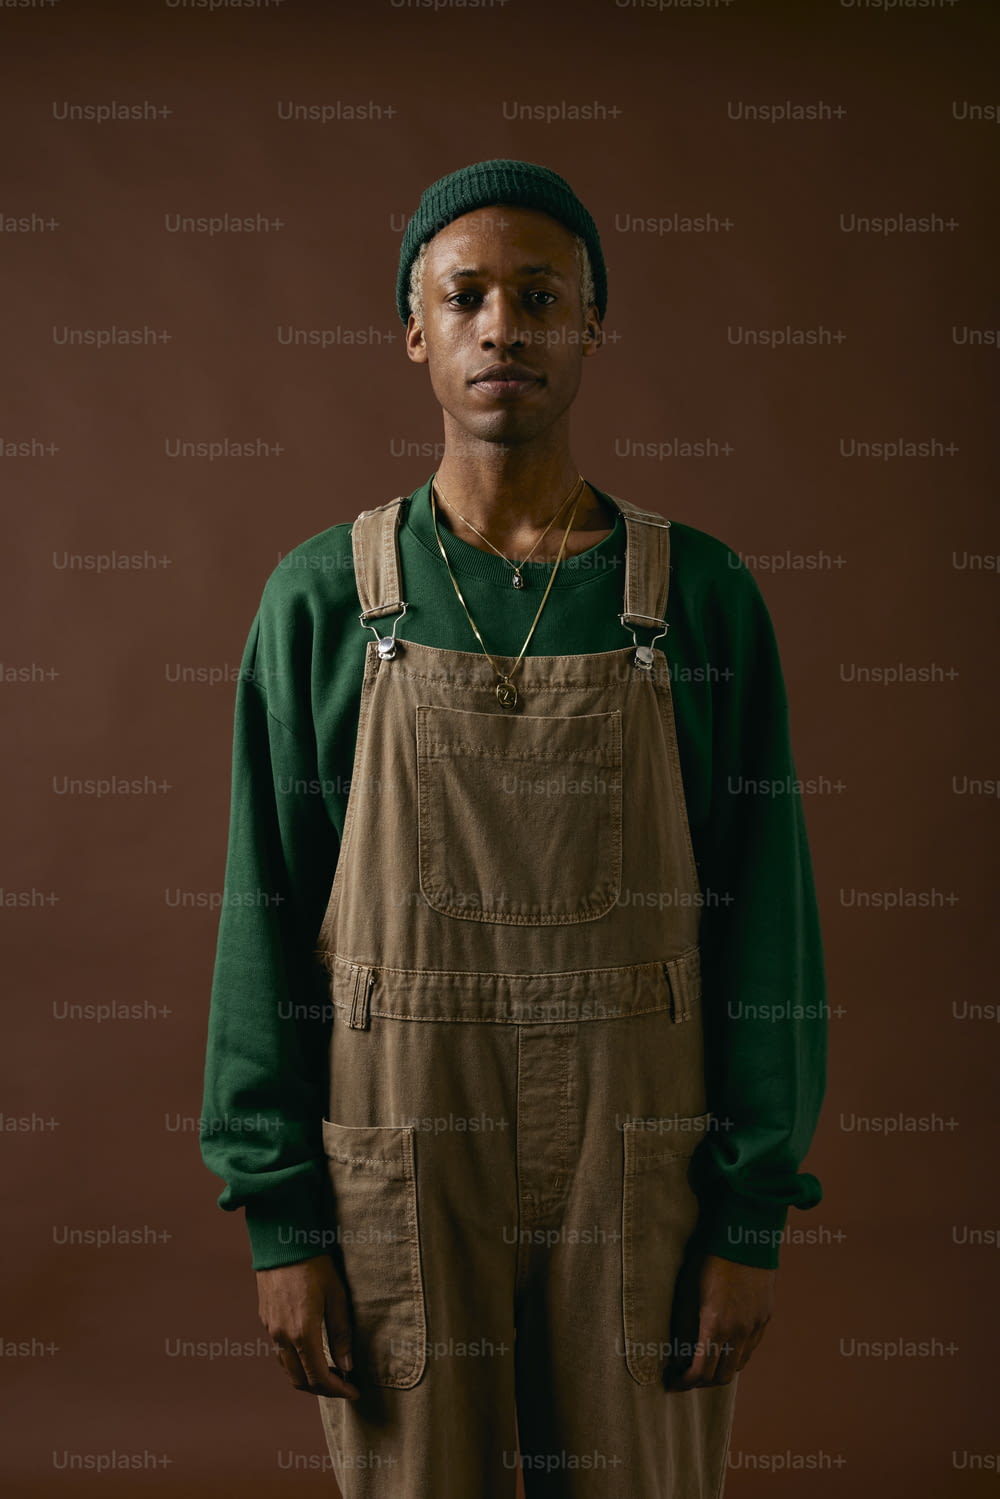 a man wearing overalls and a green sweater